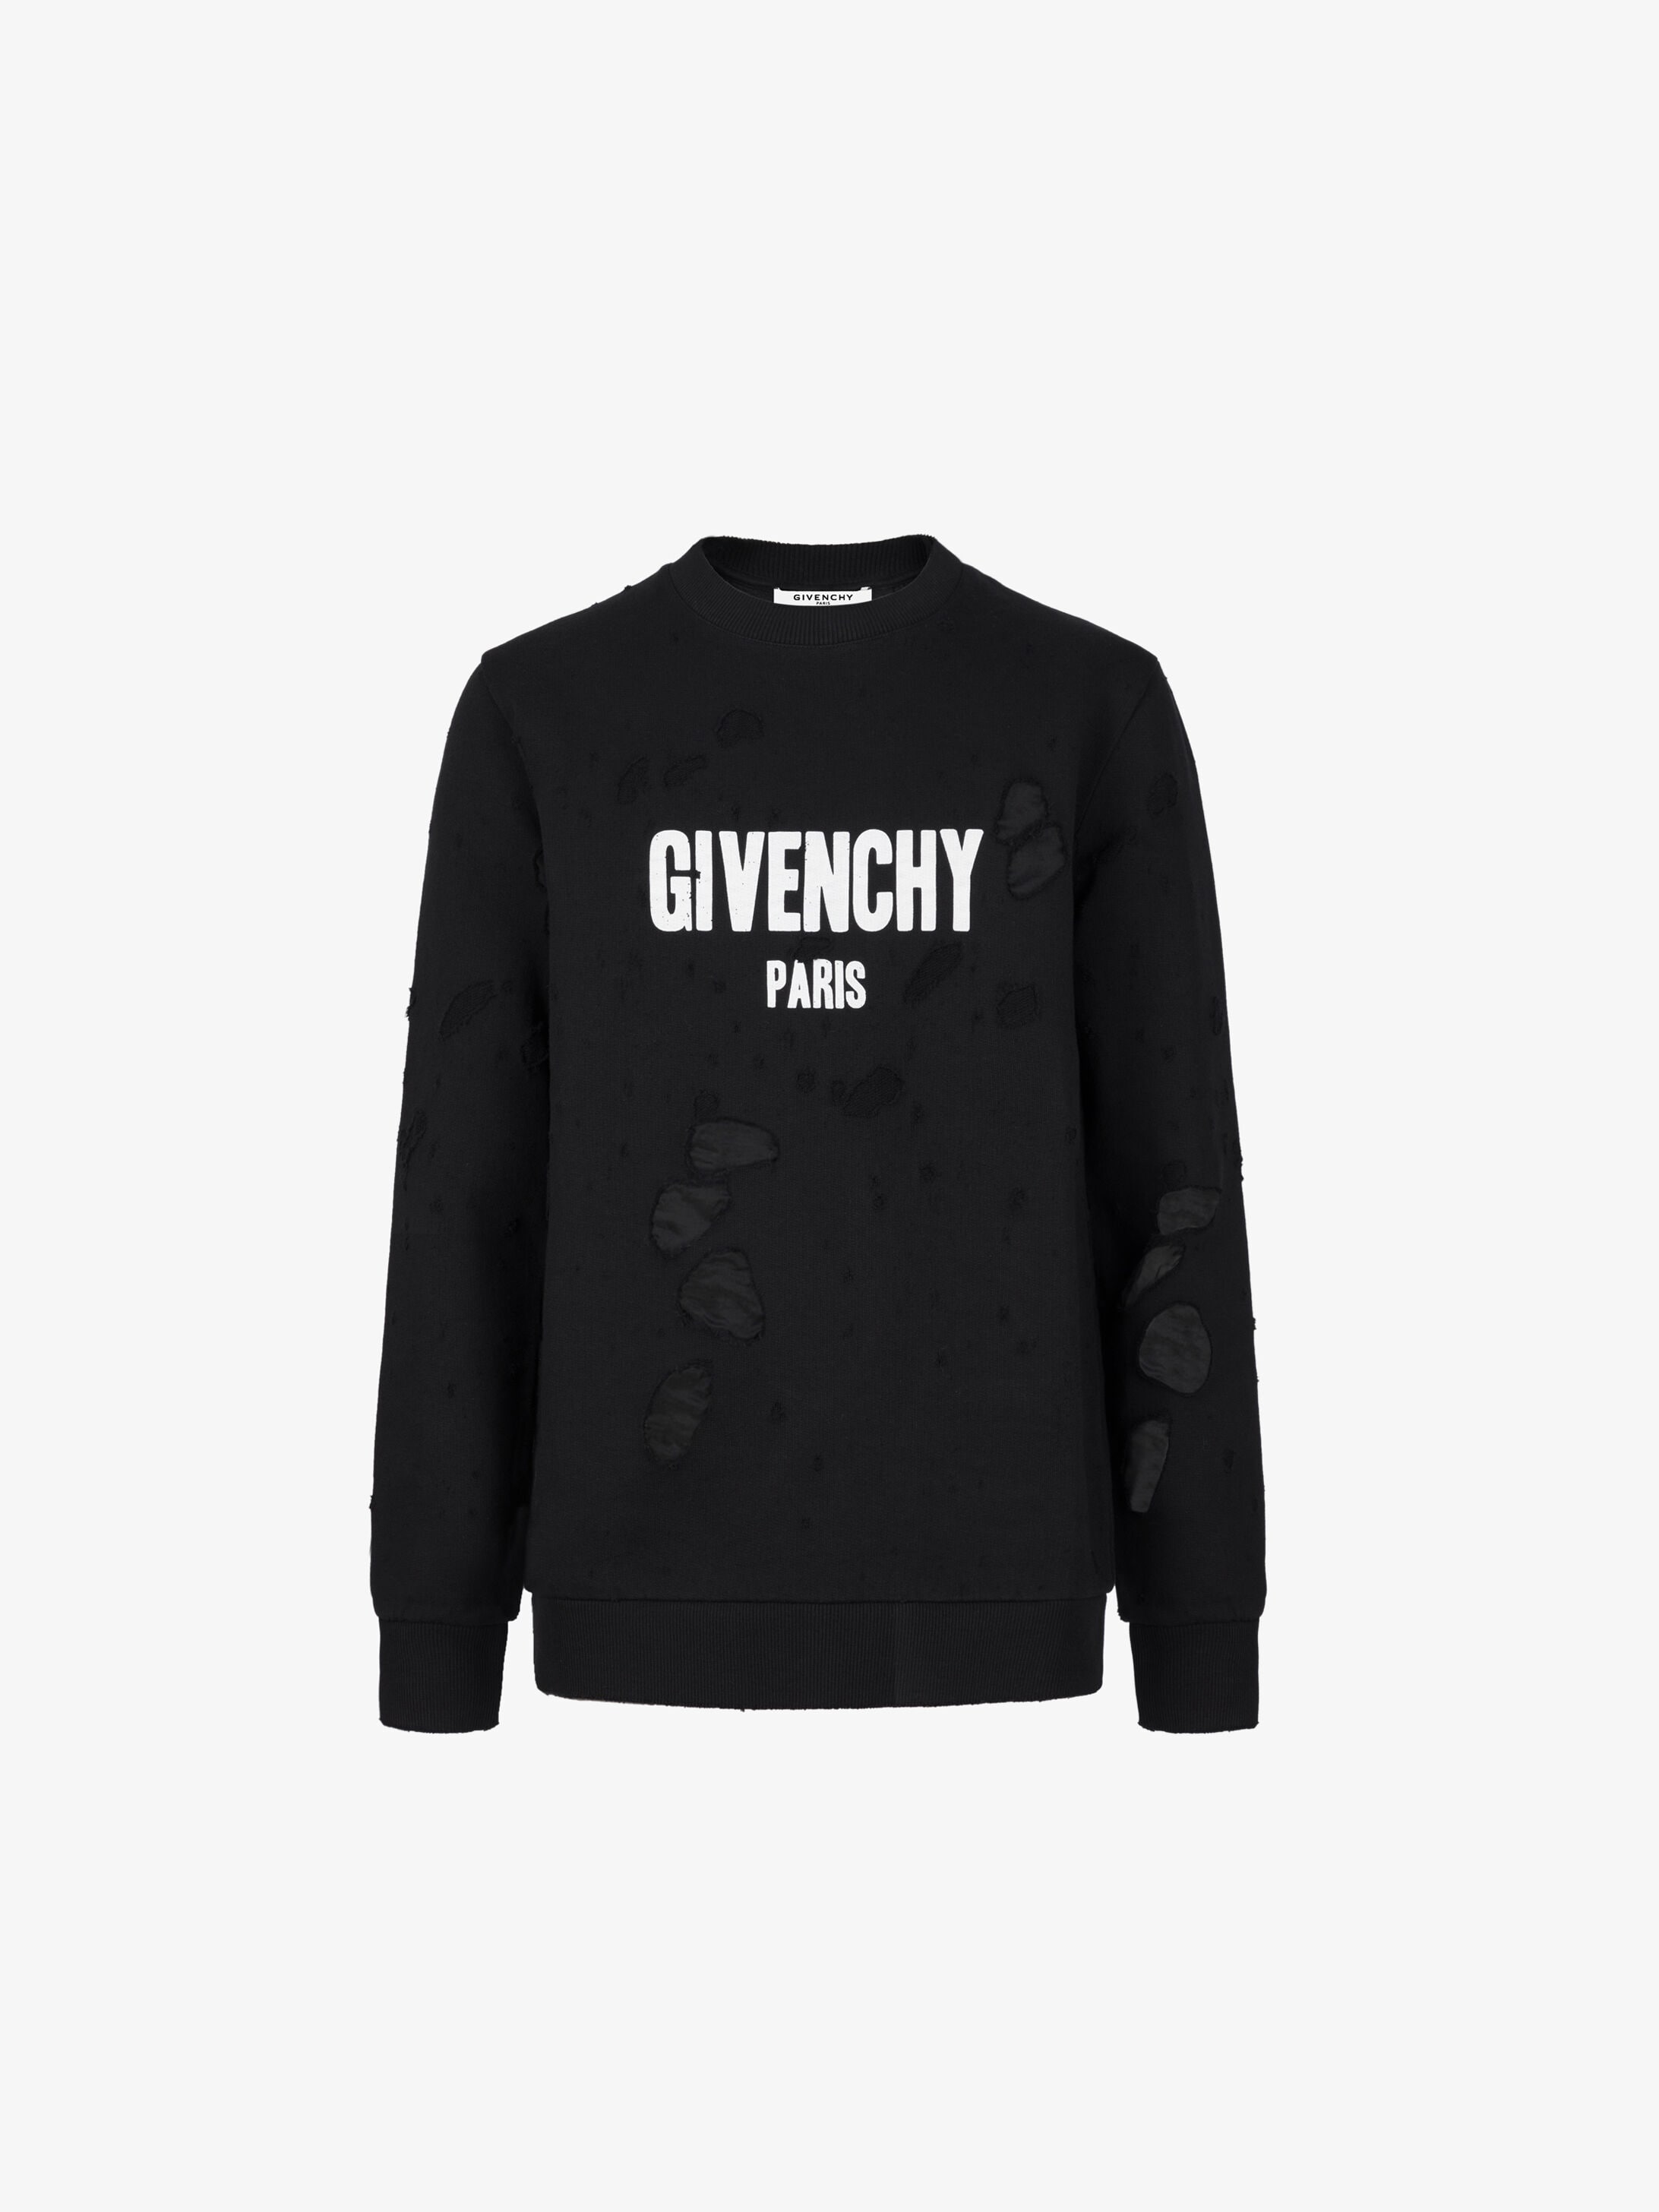 givenchy paris t shirt with holes 